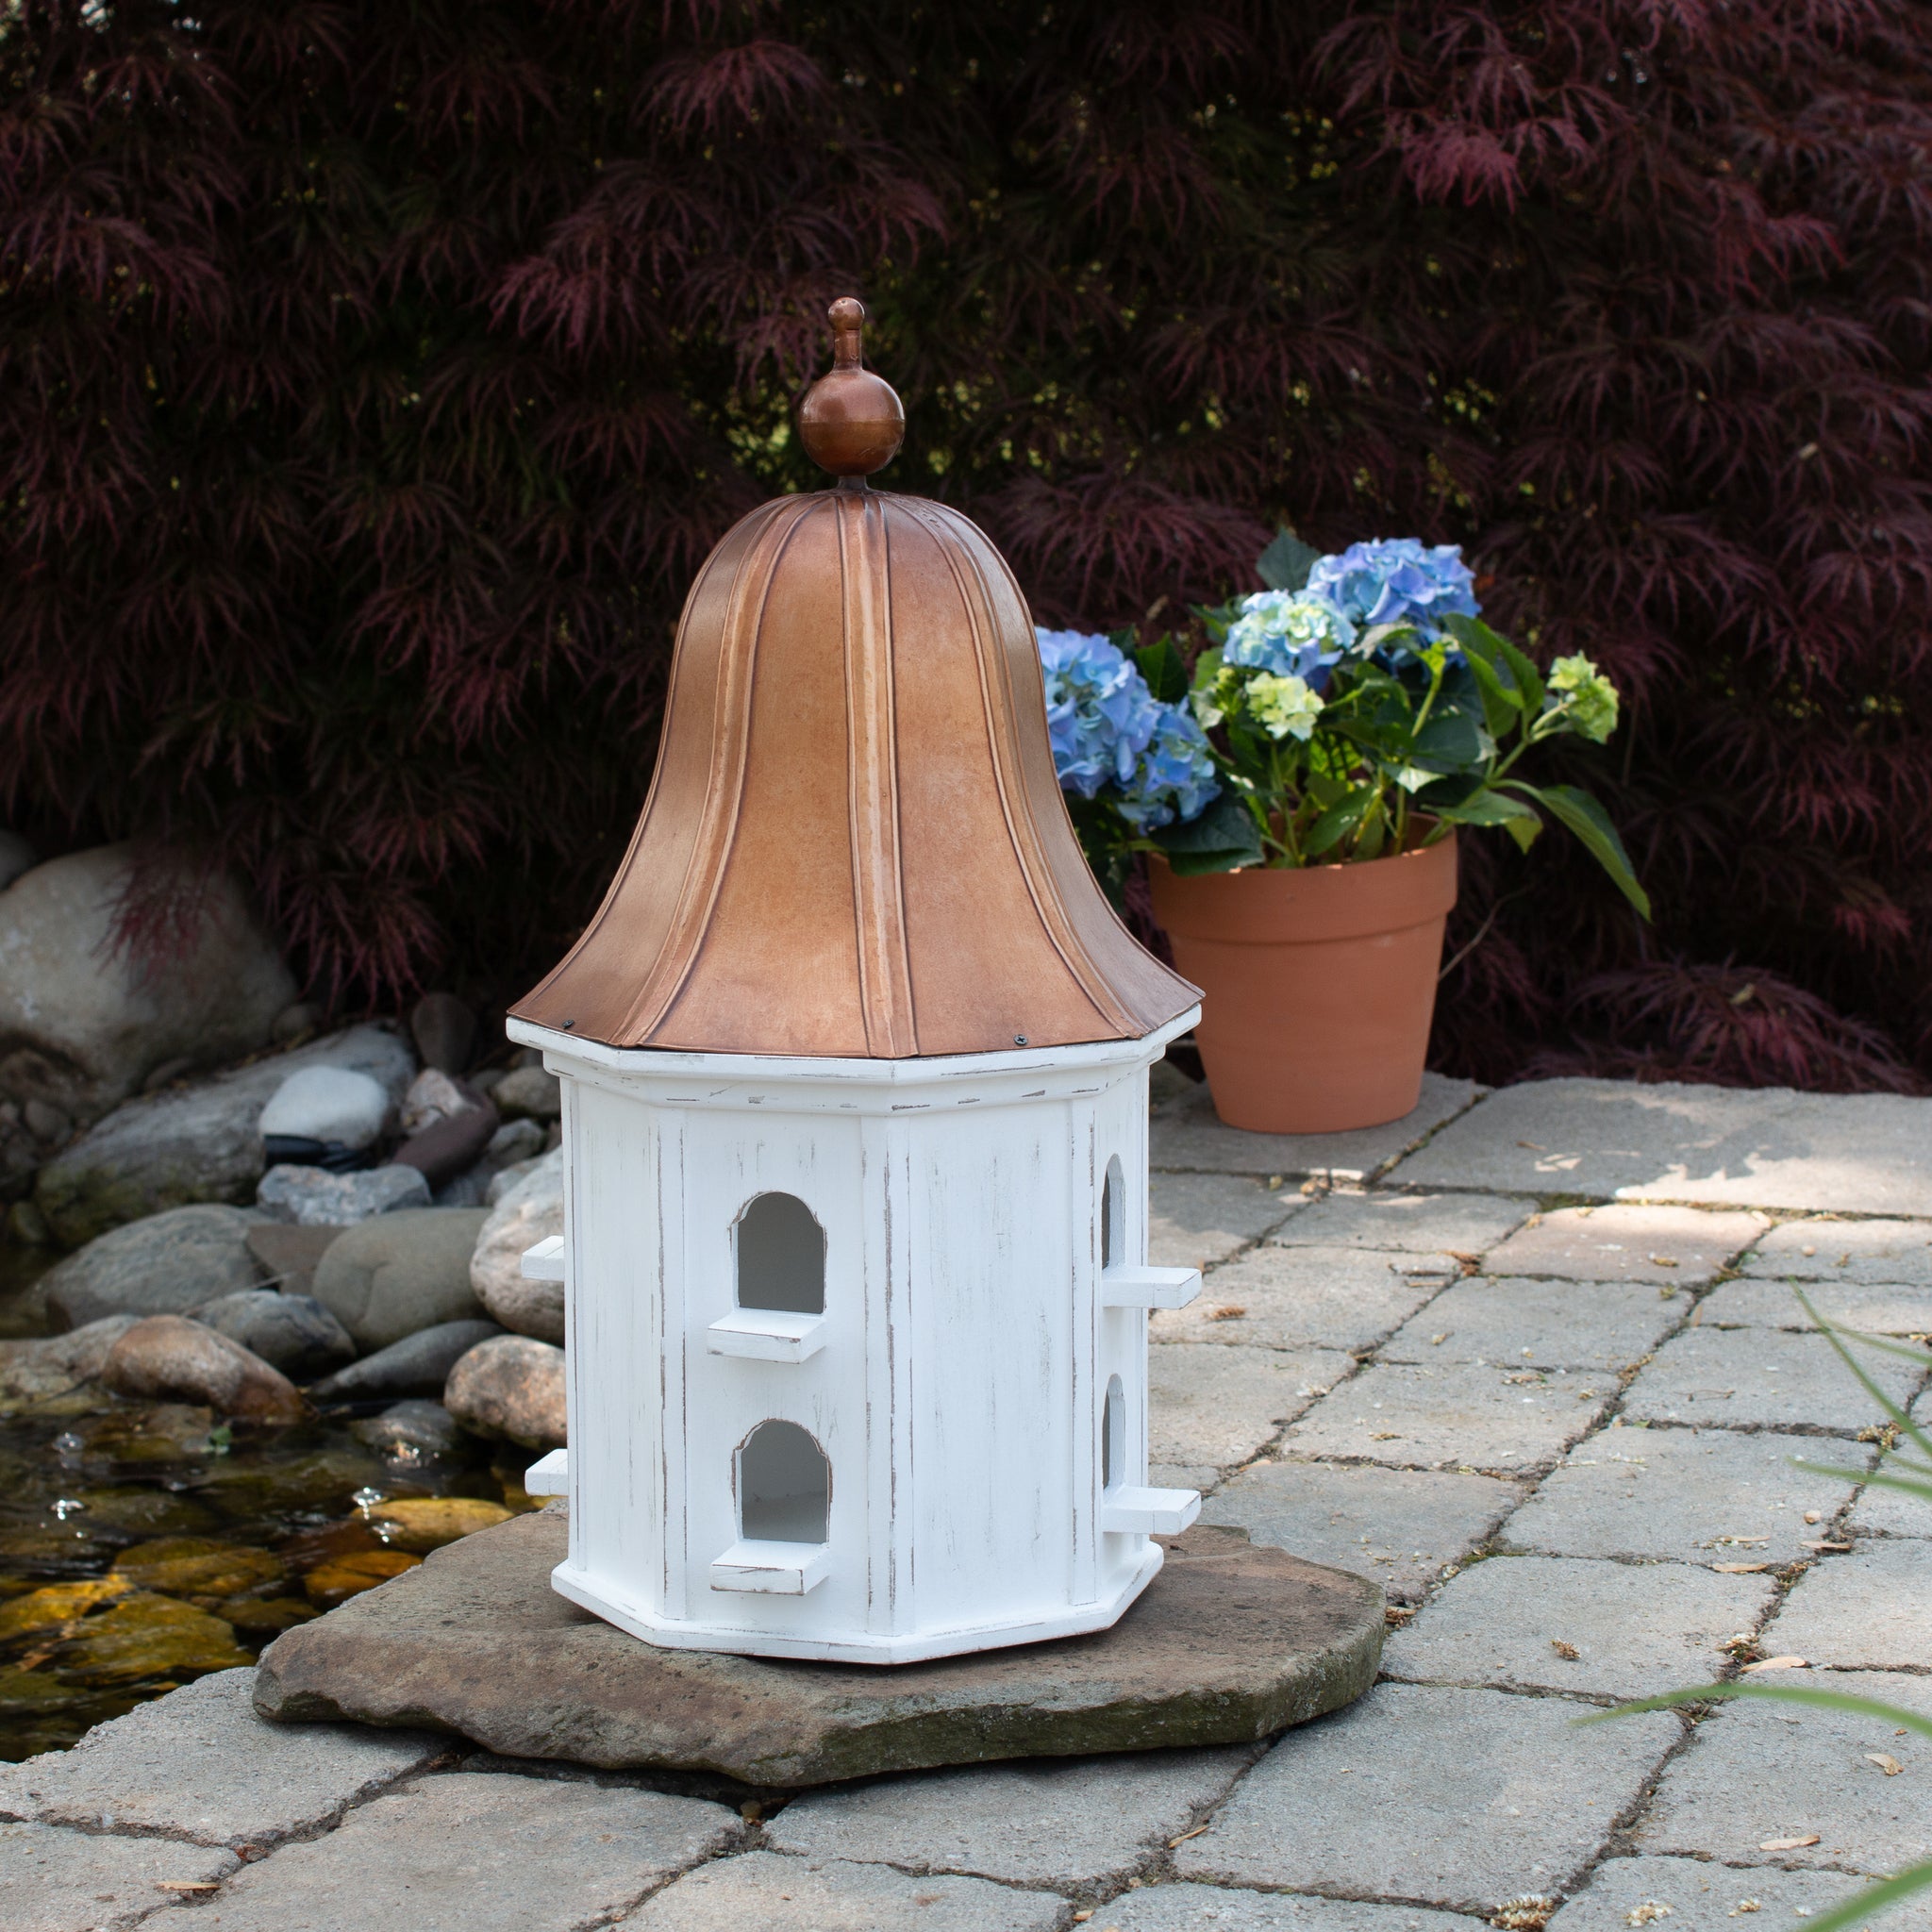 Decorative Birdhouse with Copper Tone Roof